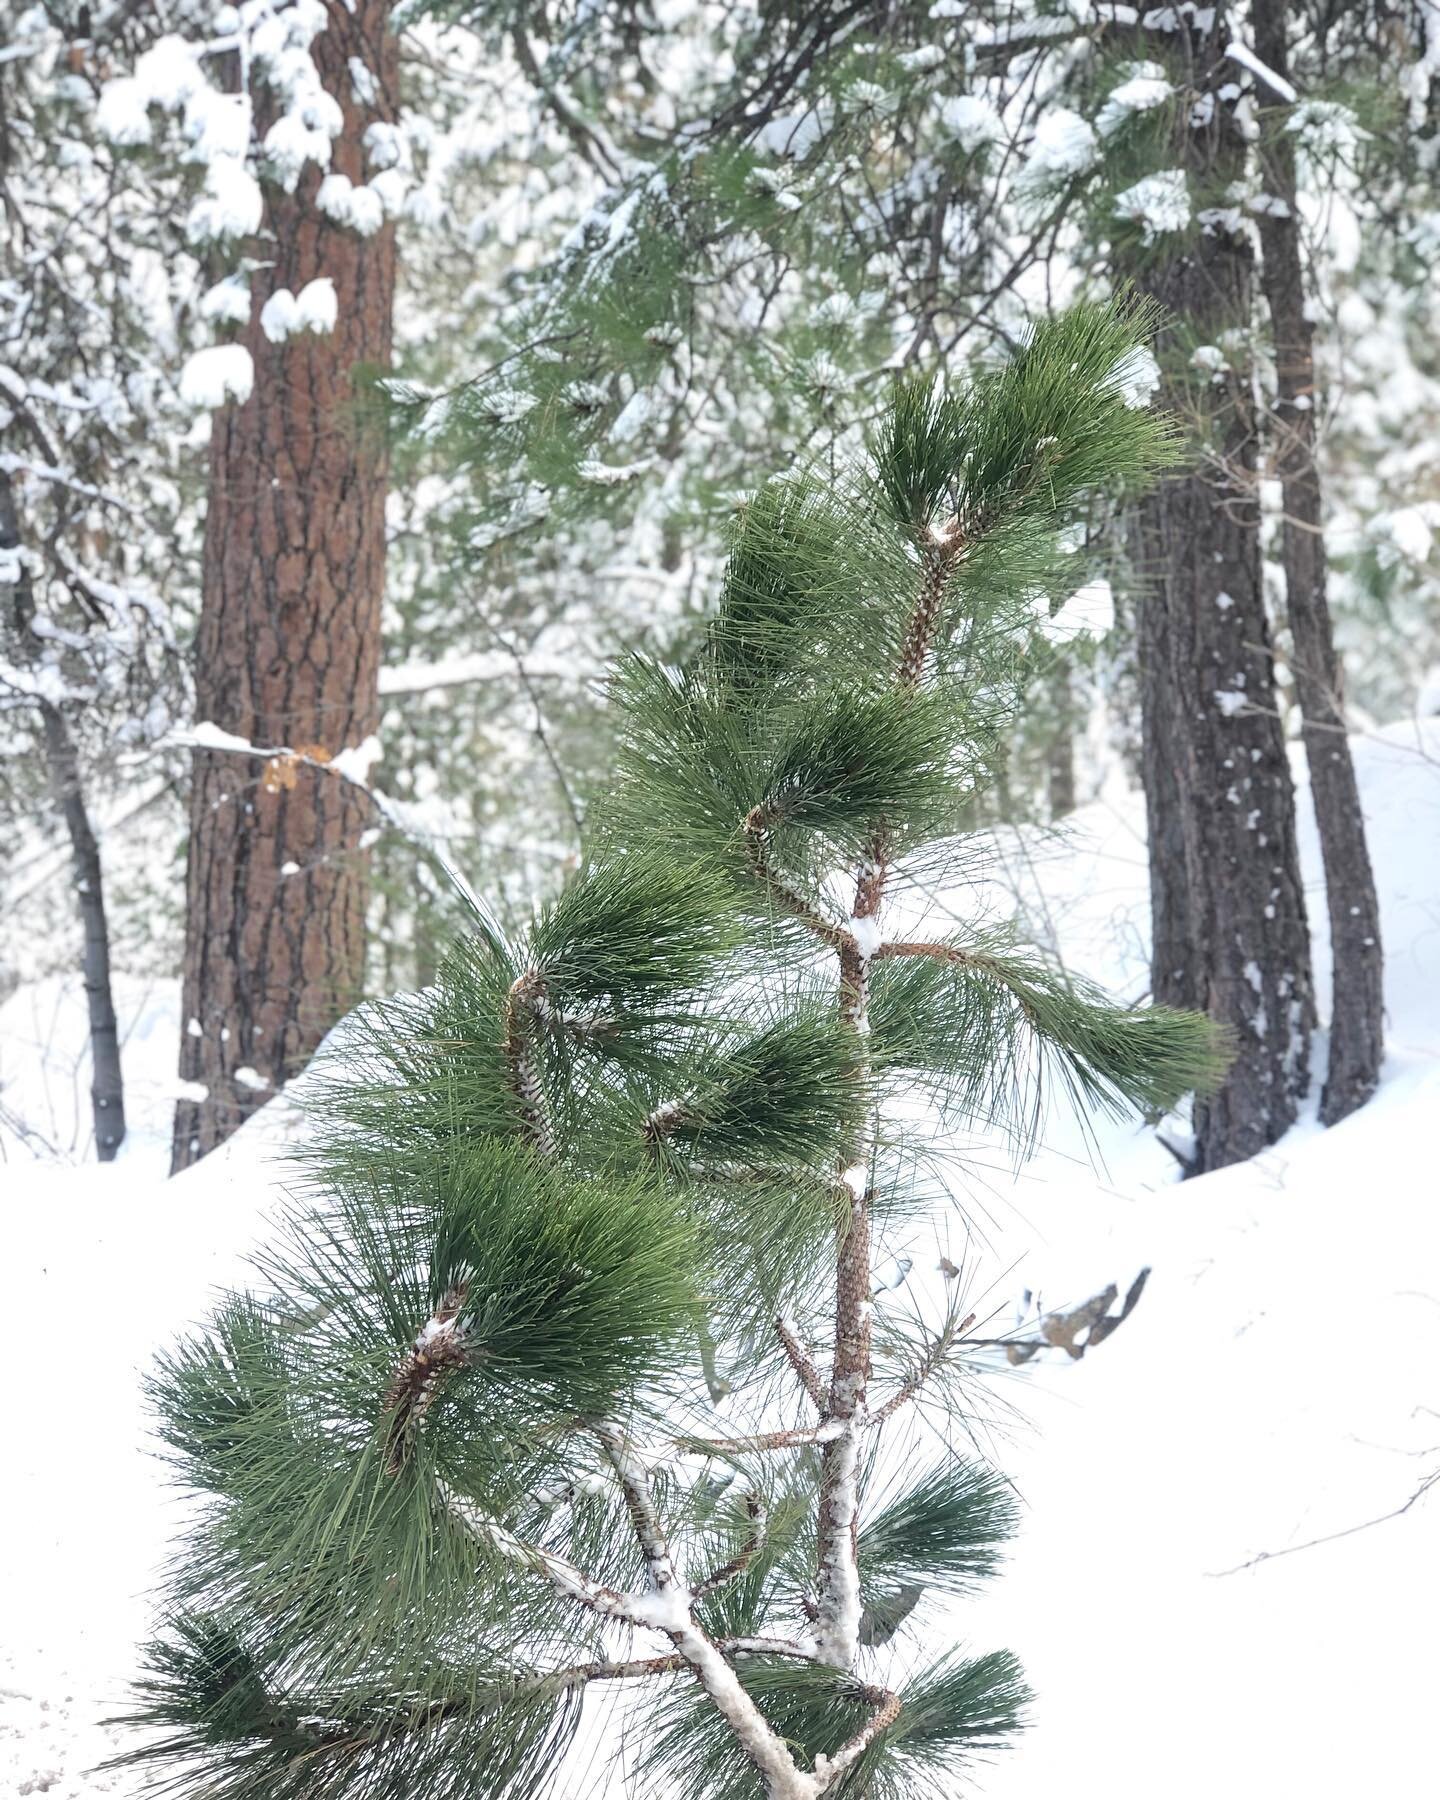 Welcome 2021 and winter in Southern Cal ❄️ Lately... We have made a couple trips up to our local mountains to play, ski and wander... am savoring chilly evenings at home... still lighting the evergreen-scented candles and leaving up the pinecones and